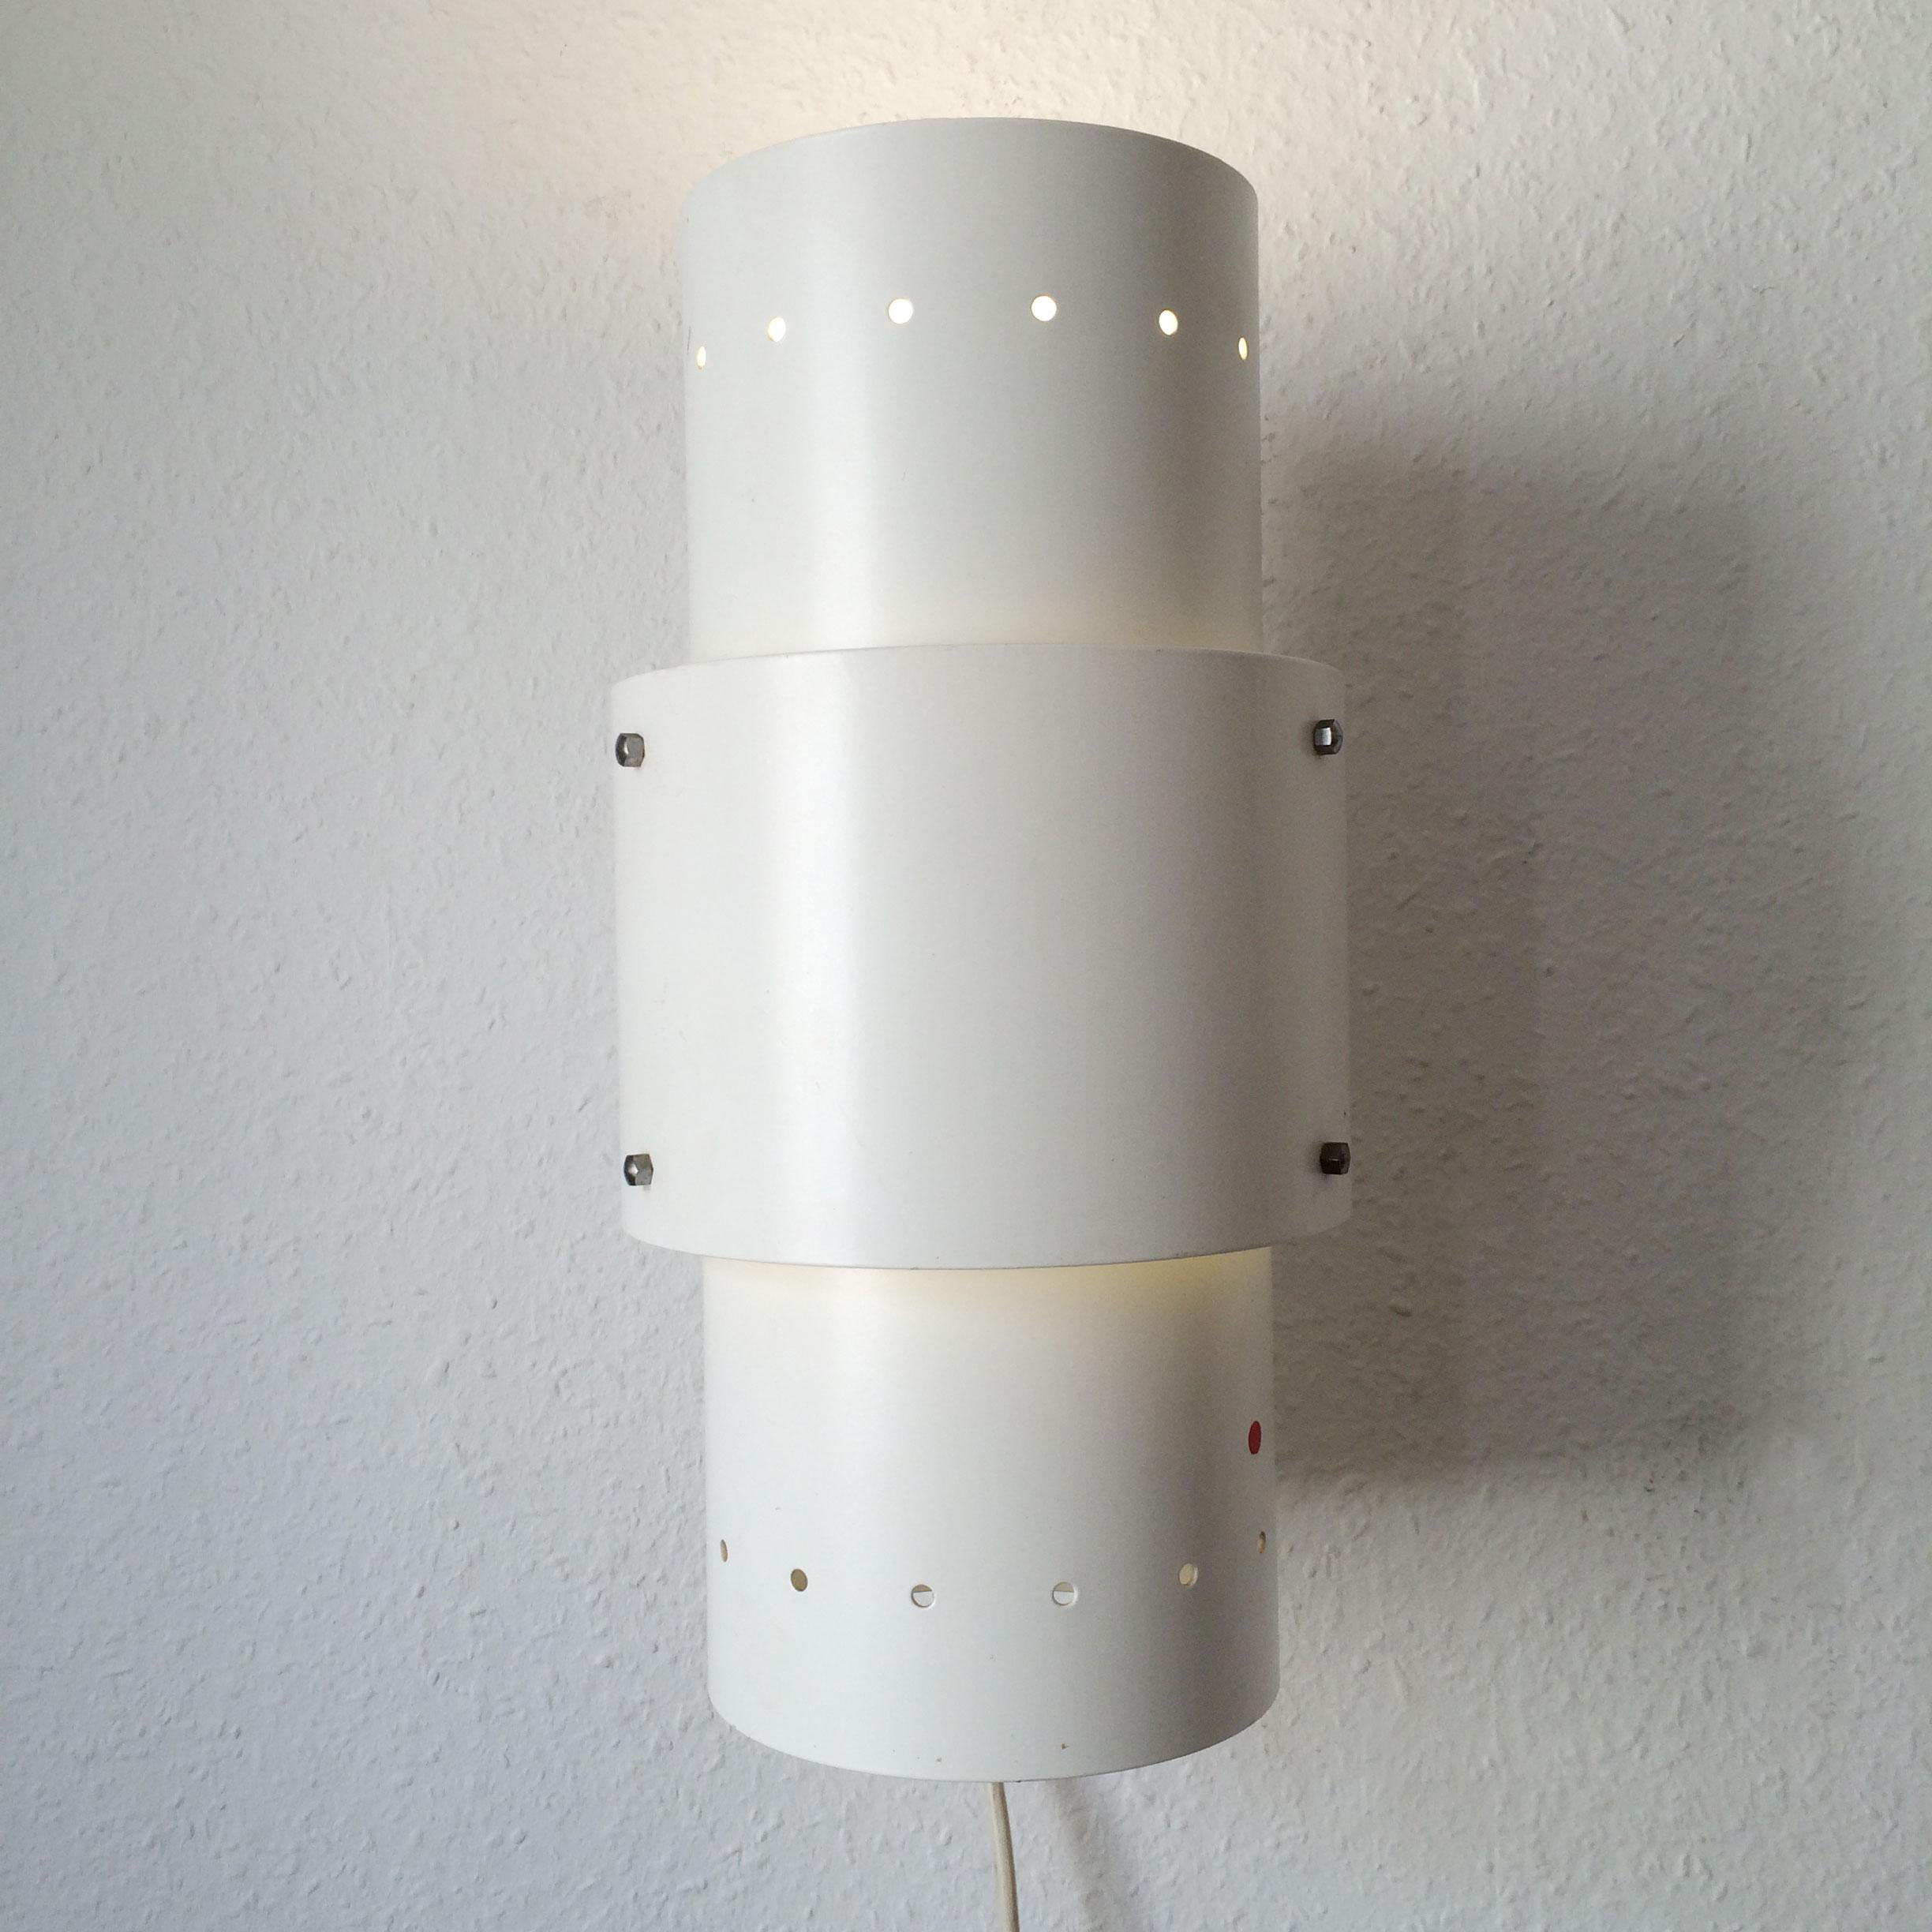 Monumental Mid-Century Modern wall lamp or sconce by Spectral, Freiburg, Germany, circa 1980s.
Executed in thick, perforated and white lacquered metal.

A total of 43 identical wall lamps / sconces available!

Each lamp needs 2x 10/13W PLC 230V 50